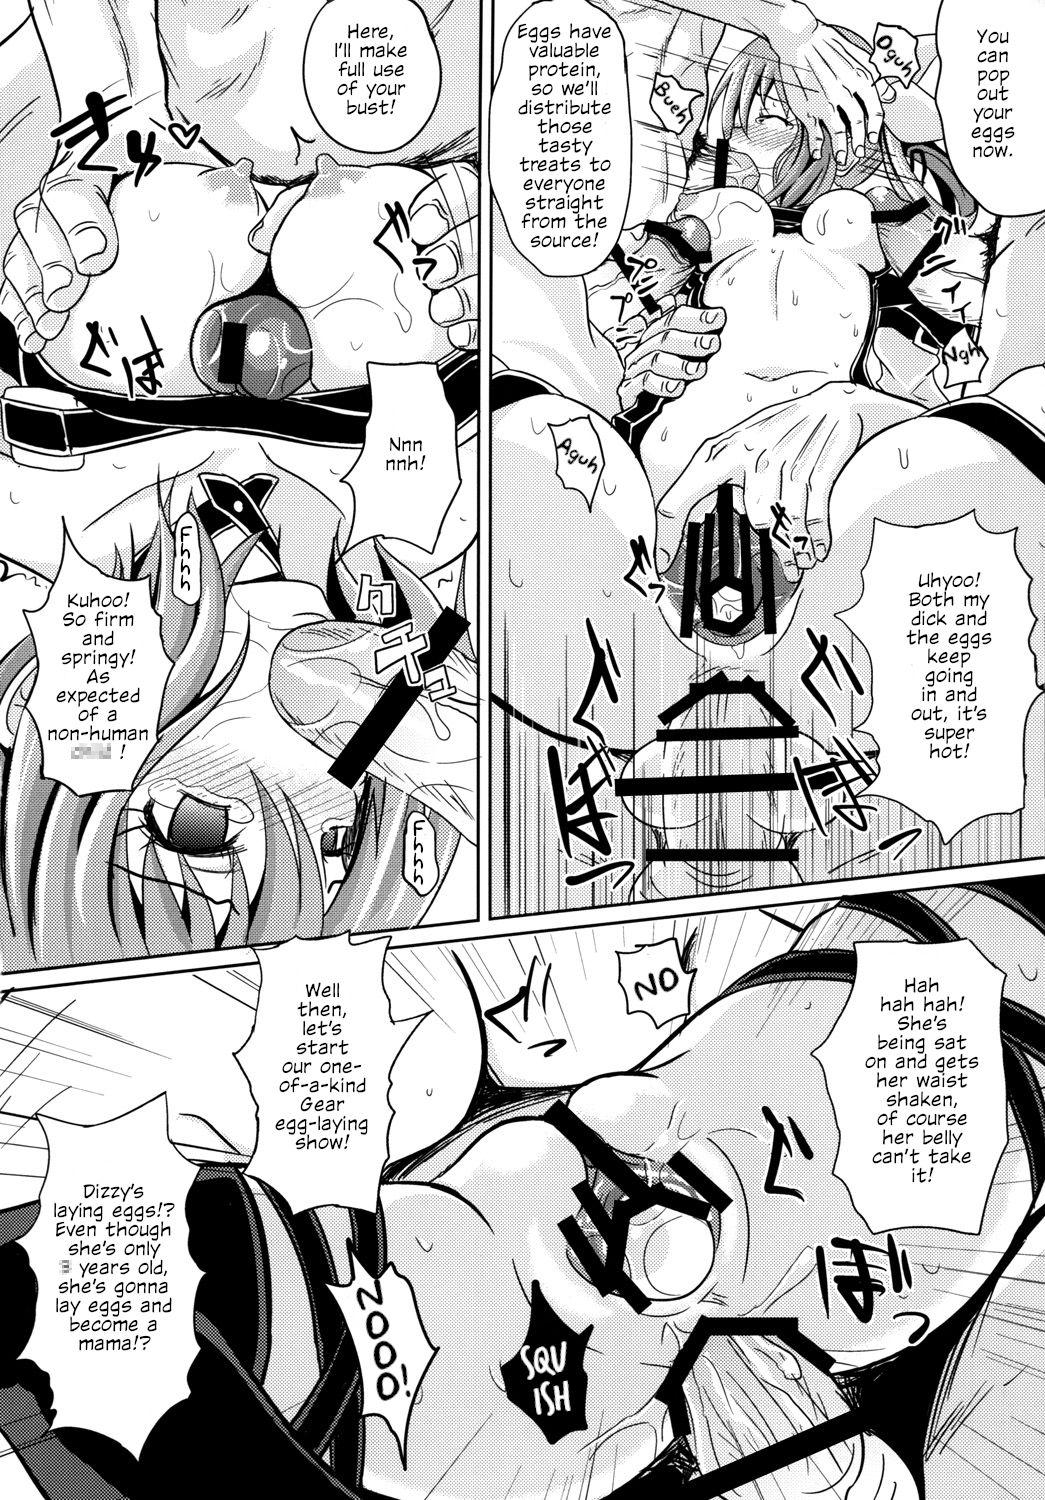 Load Acme Carnival+ | Climax Carnival+ - Guilty gear Hardcore - Page 9